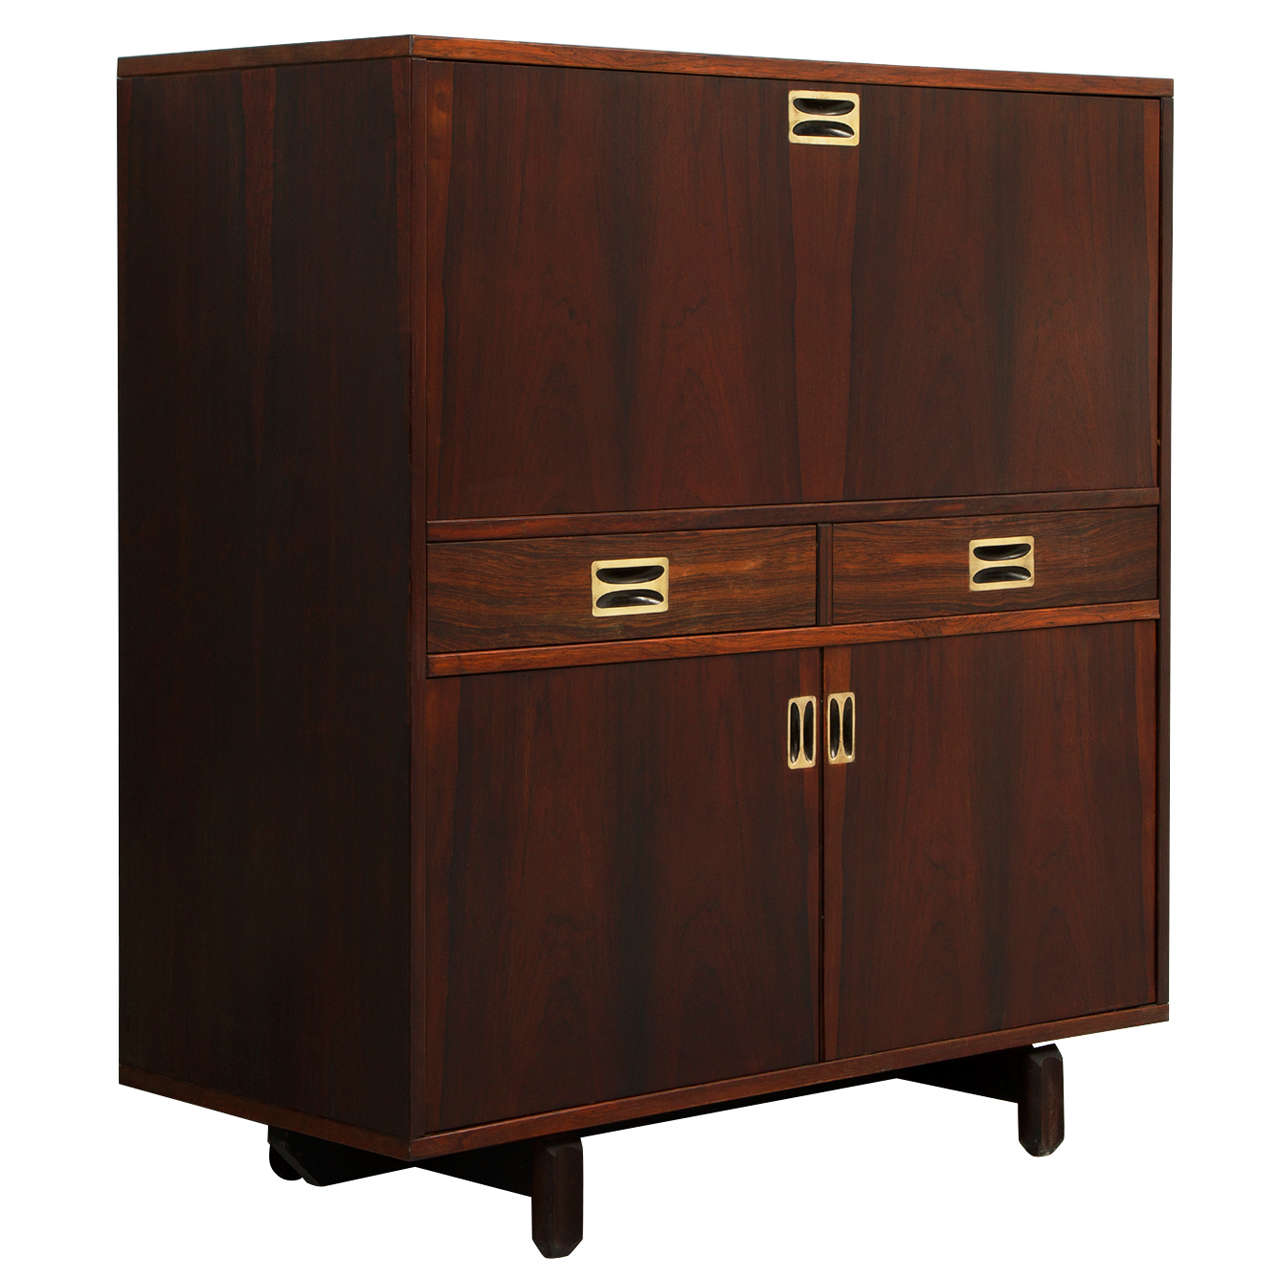 High Italian Rosewood Sideboard with Solid Brass Handles